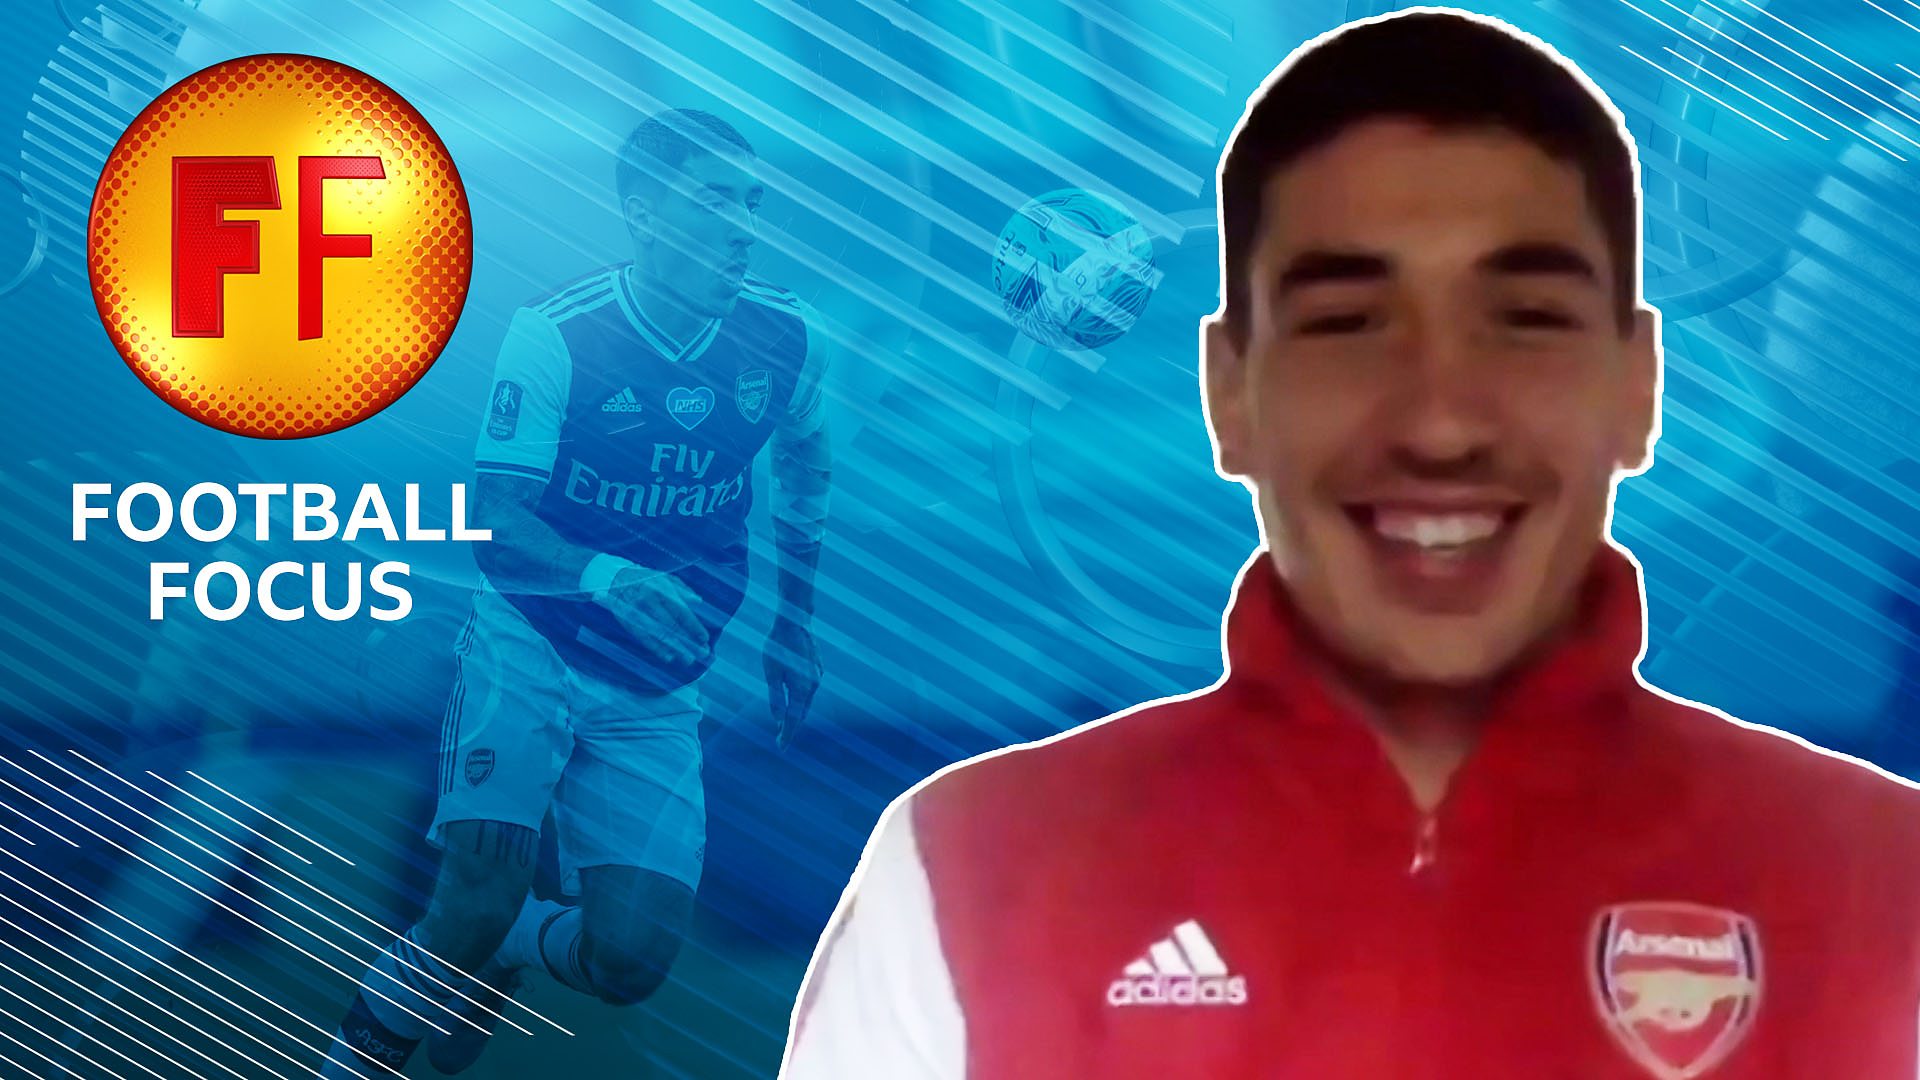 FA Cup final: Hector Bellerin has designed Arsenal's cup final